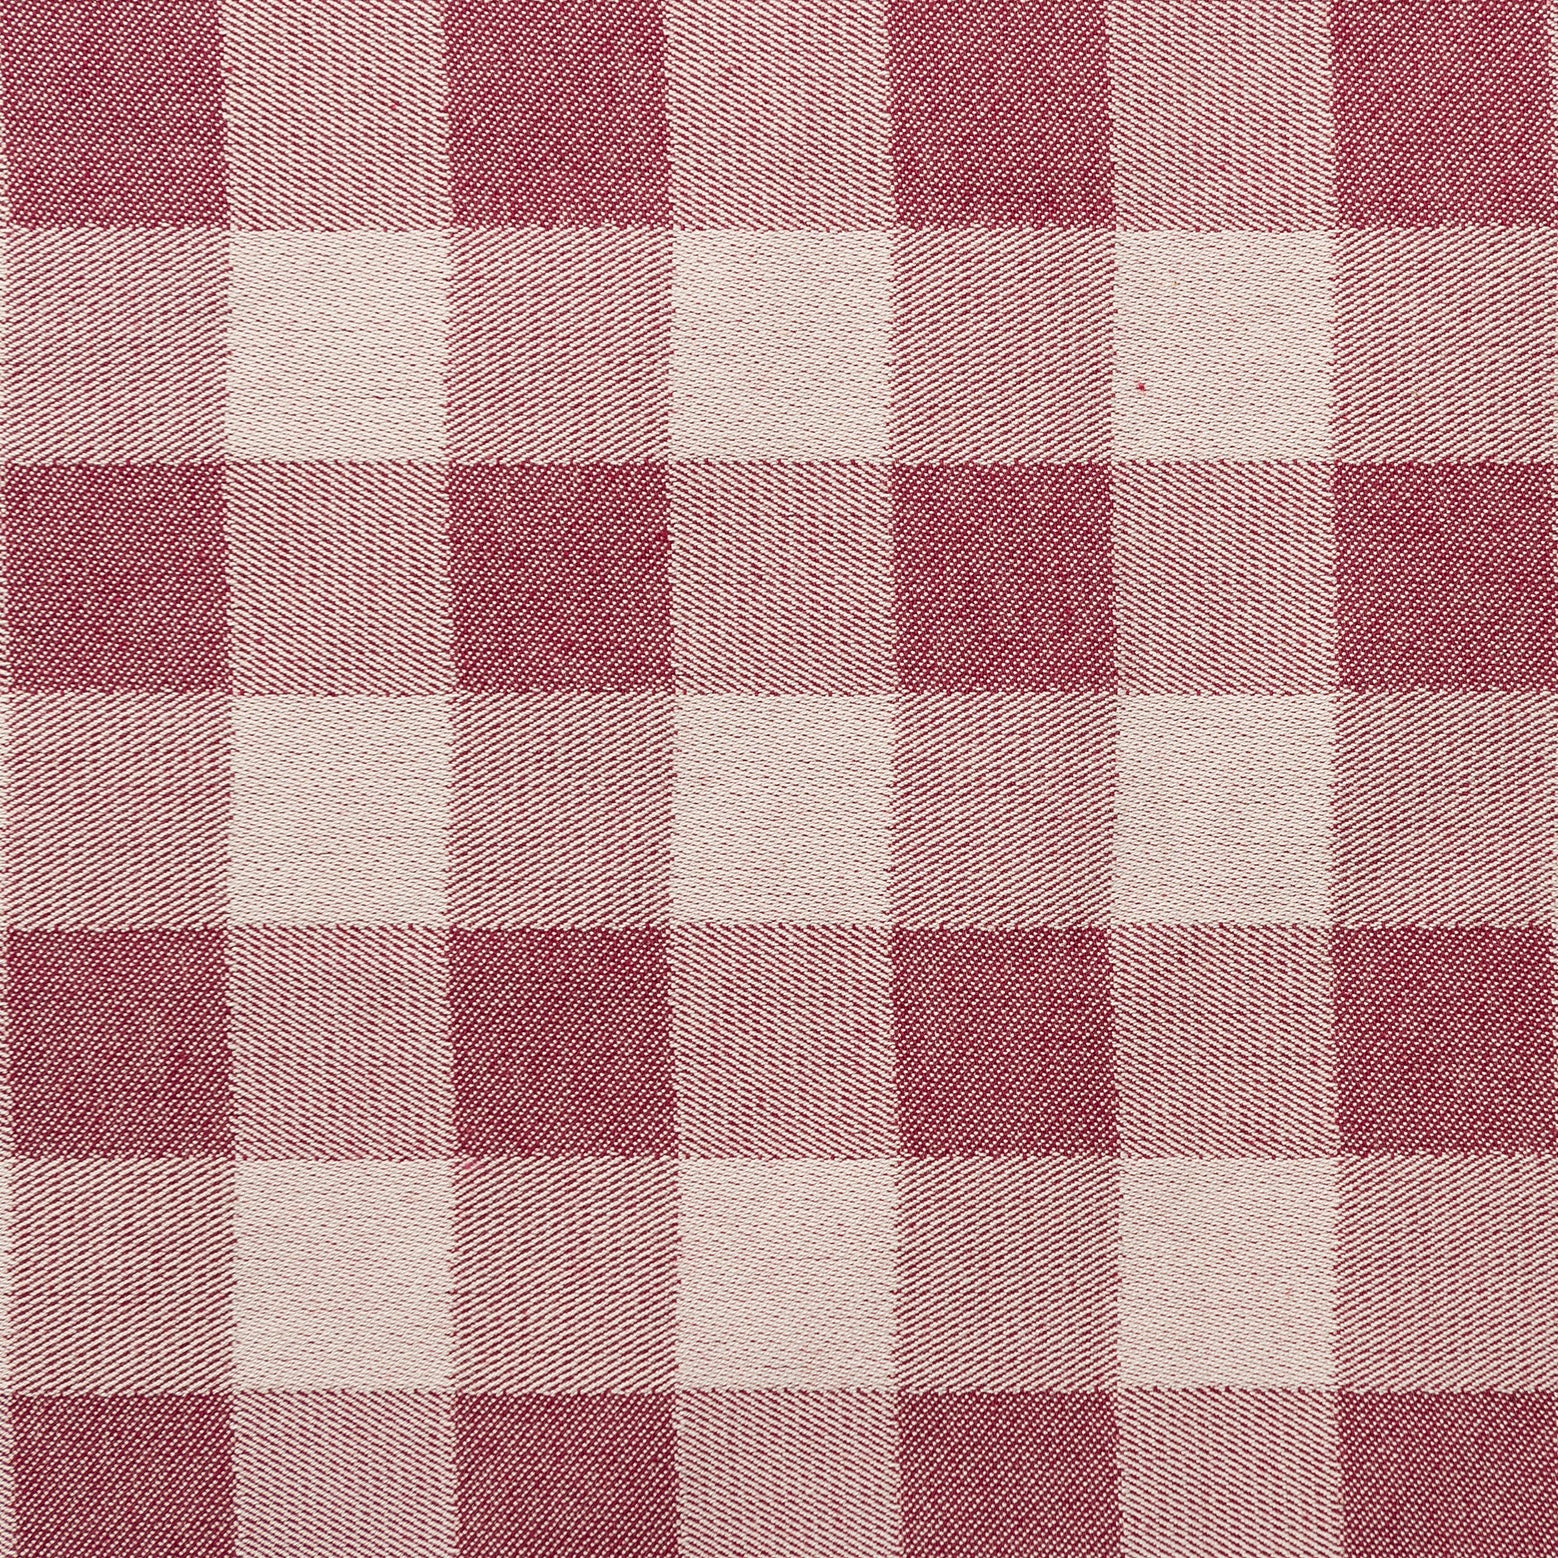 Woodhouse Check Cotton Fabric Claret sample